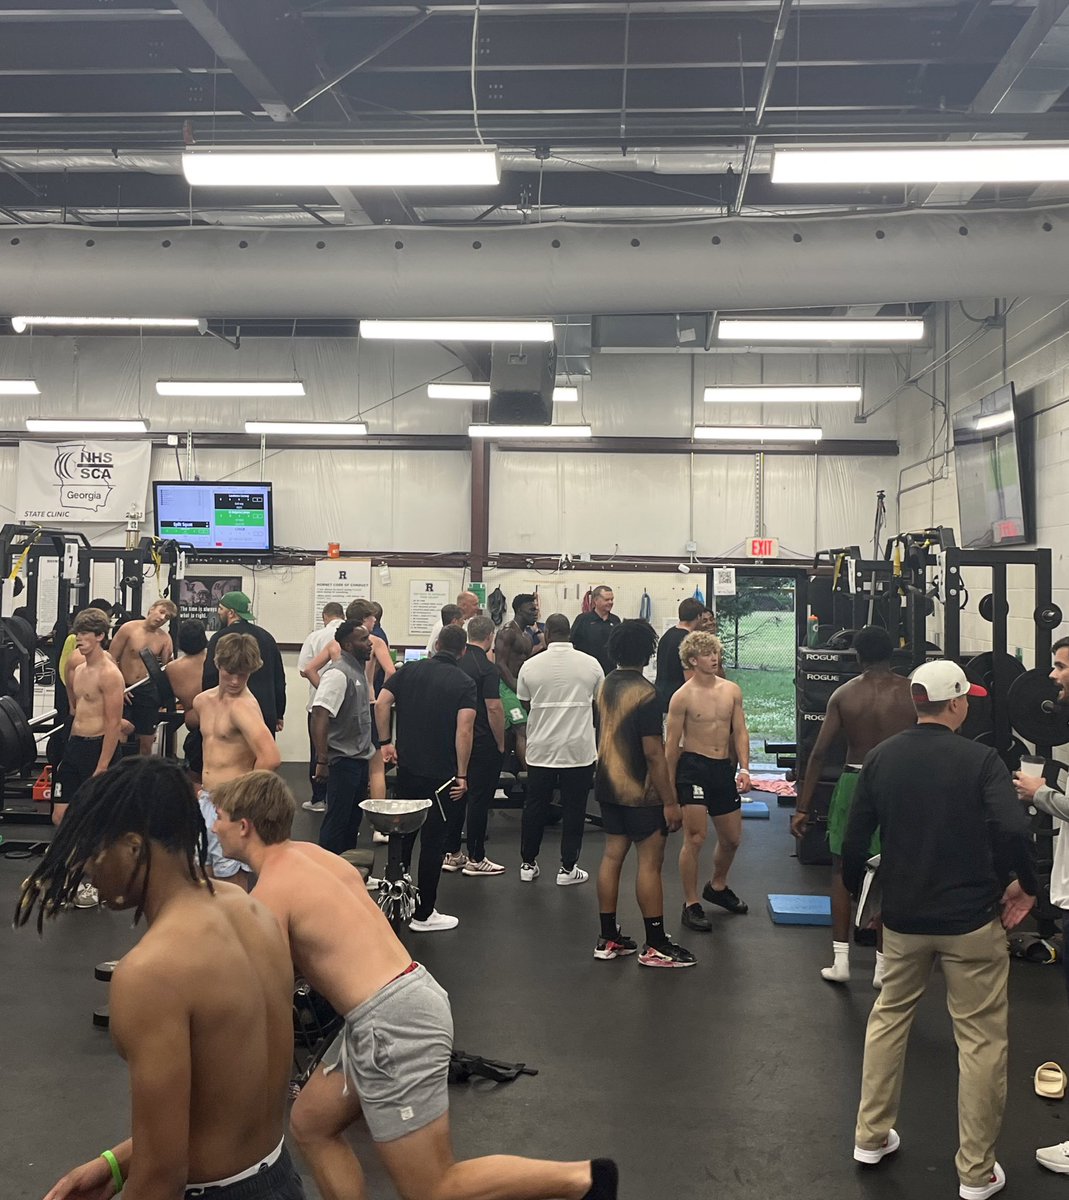 4th period weights today 🔥🔥🔥 22 college coaches coming through to check out @RoswellHornetFB @GeorgiaFootball @GTFootball @GSAthletics_FB all in the house!!!